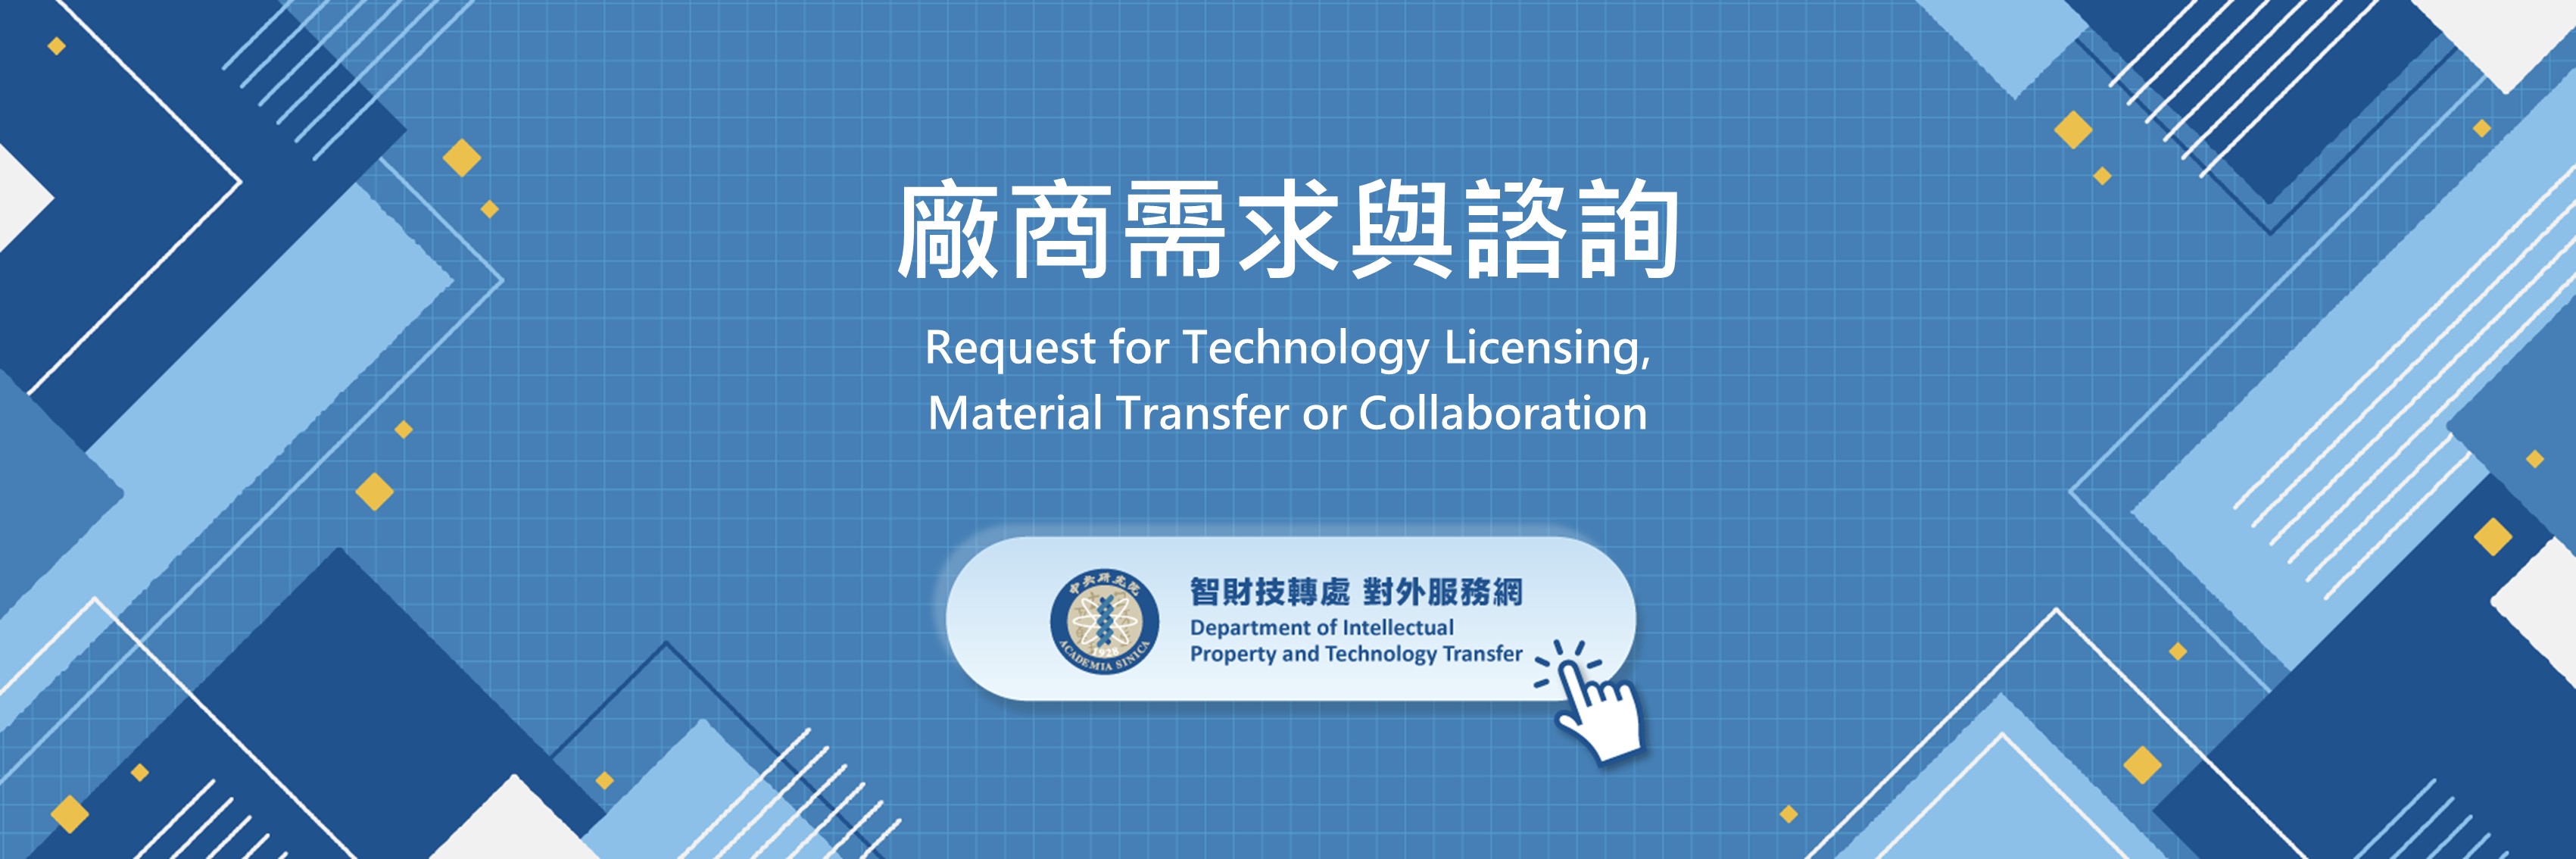 Apply for Technology Licensing Material Transfer or Collaboration